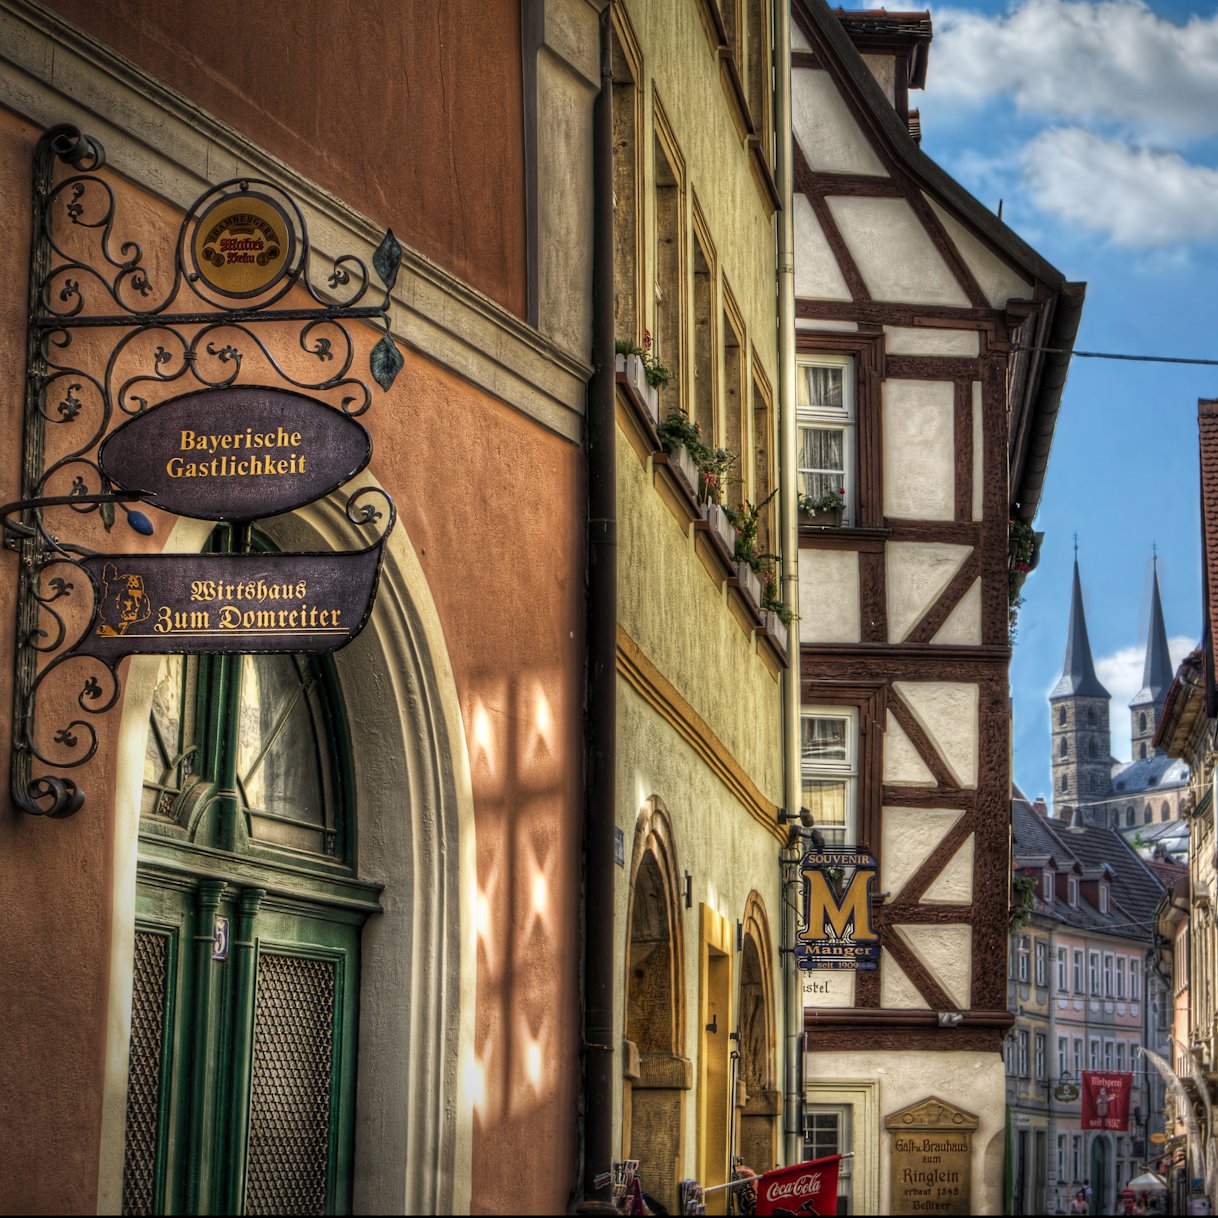 Alley in Bamberg